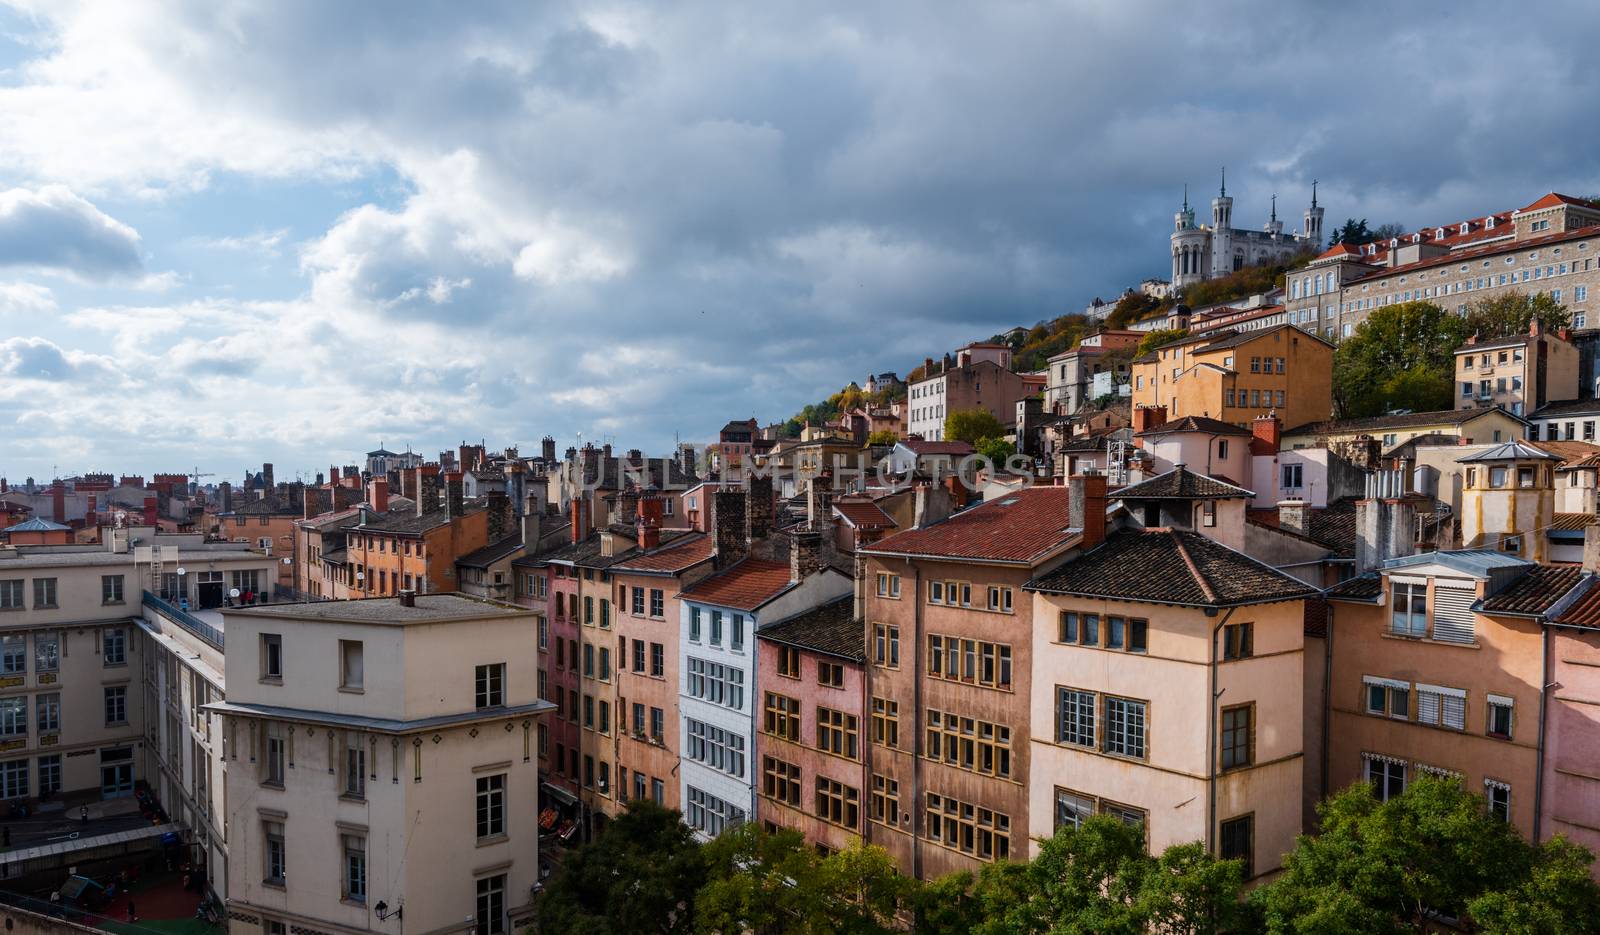 A wide angle photo of Lyon with the Basilica of Notre-Dame de Fourviere at the top of the hill.